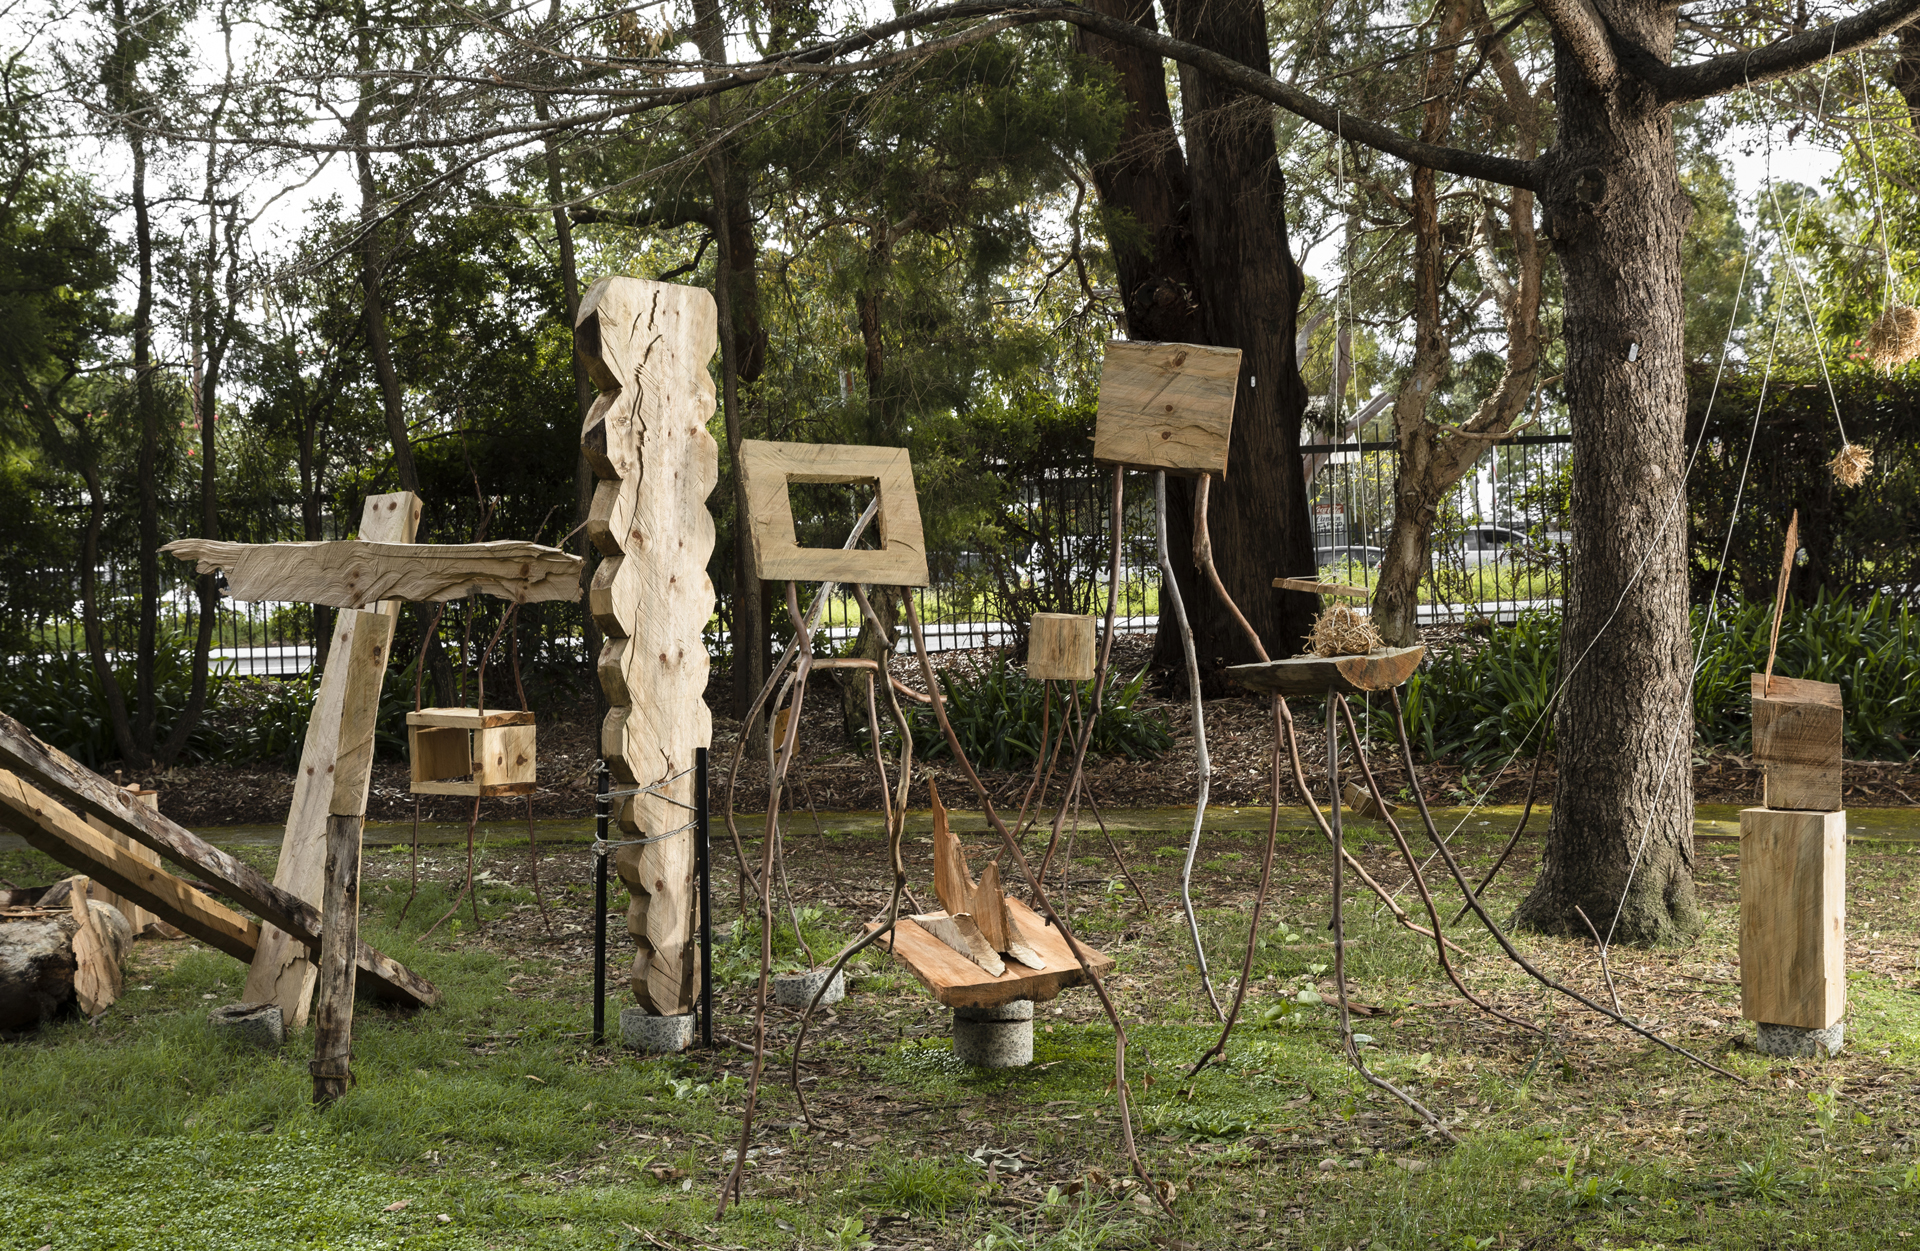 A group of wooden sculptures of varying sizes shapes and styles surrounded by trees.